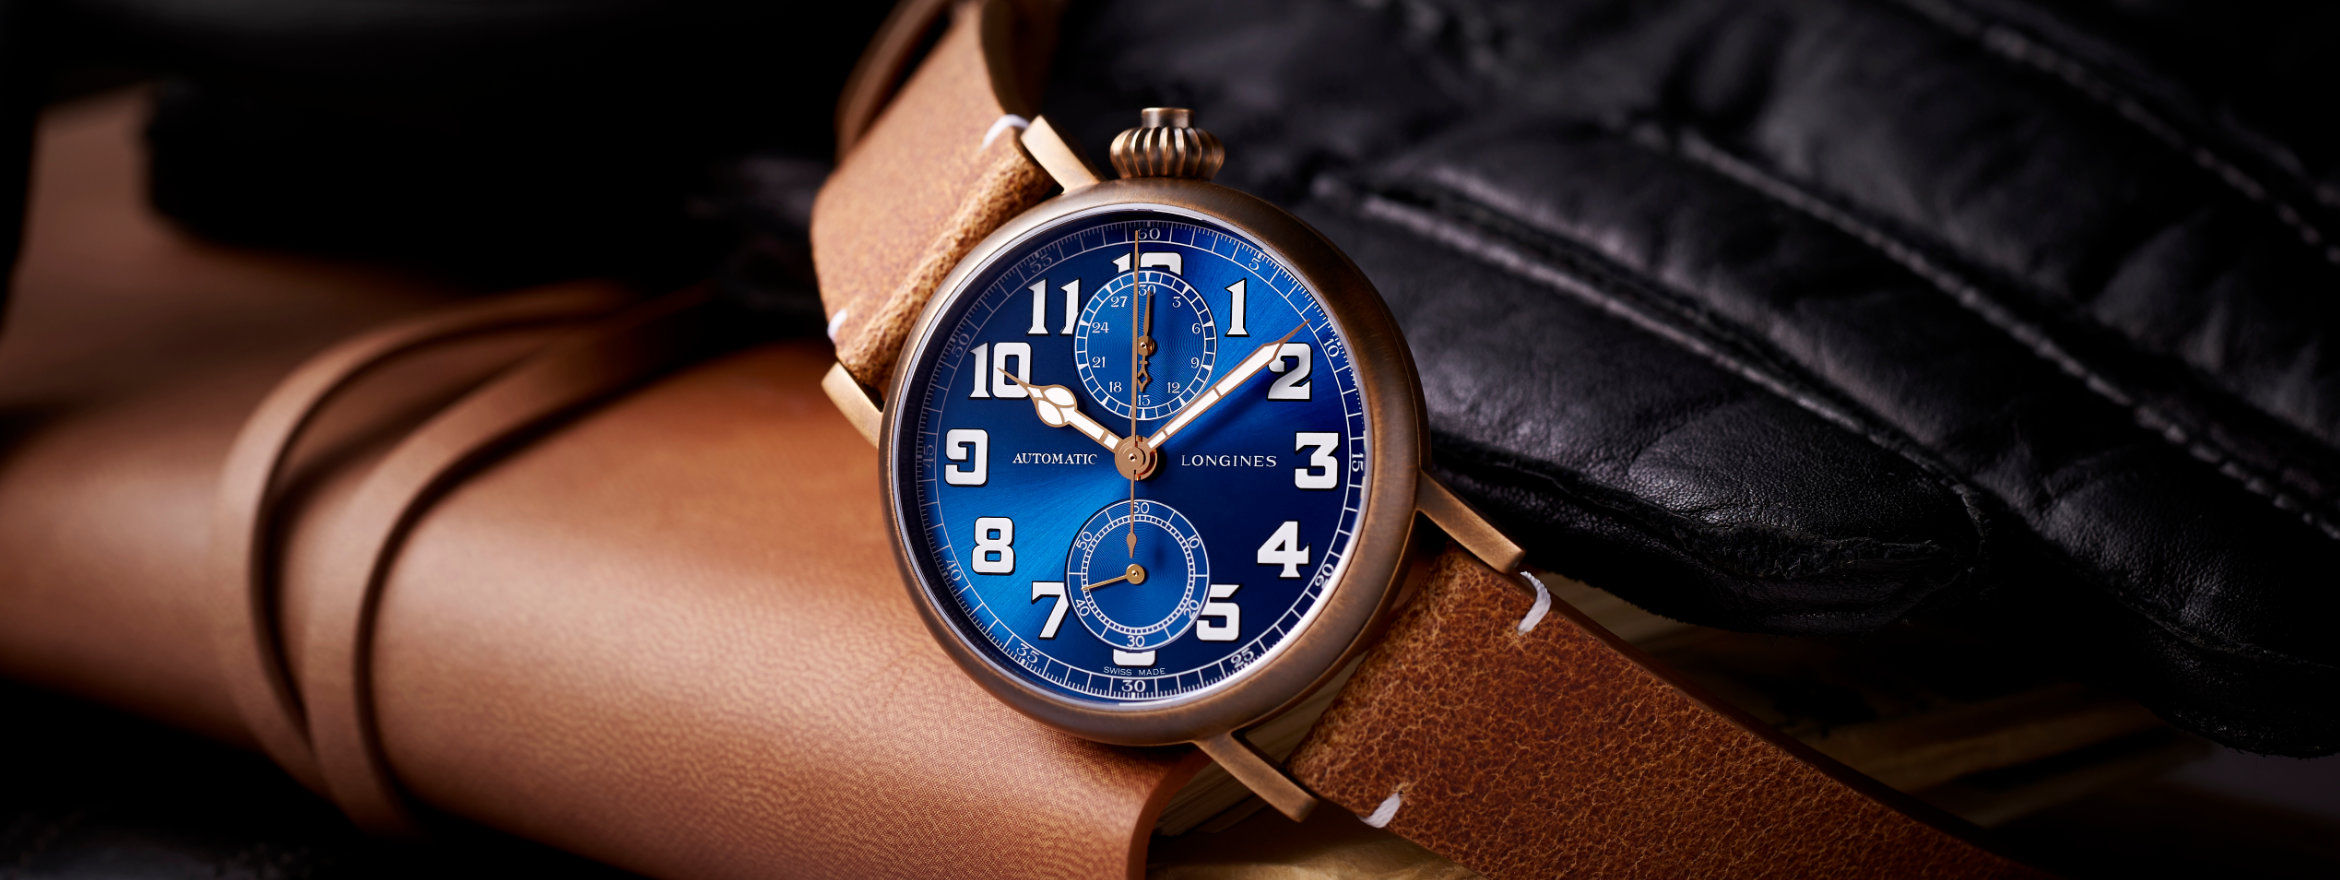 Longines x The Hour Glass (Commemorative Edition)